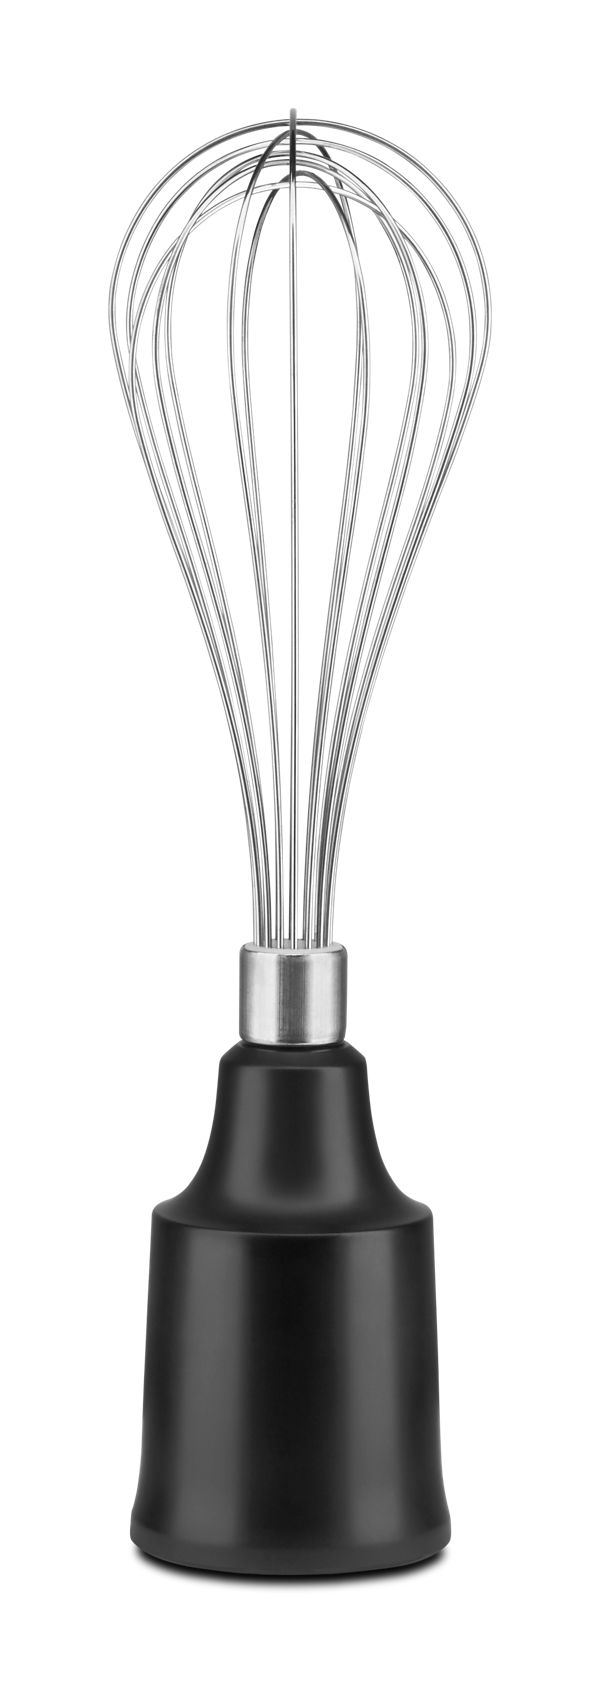 KitchenAid® Whisk Accessory For Cordless Variable Speed Hand Blenders